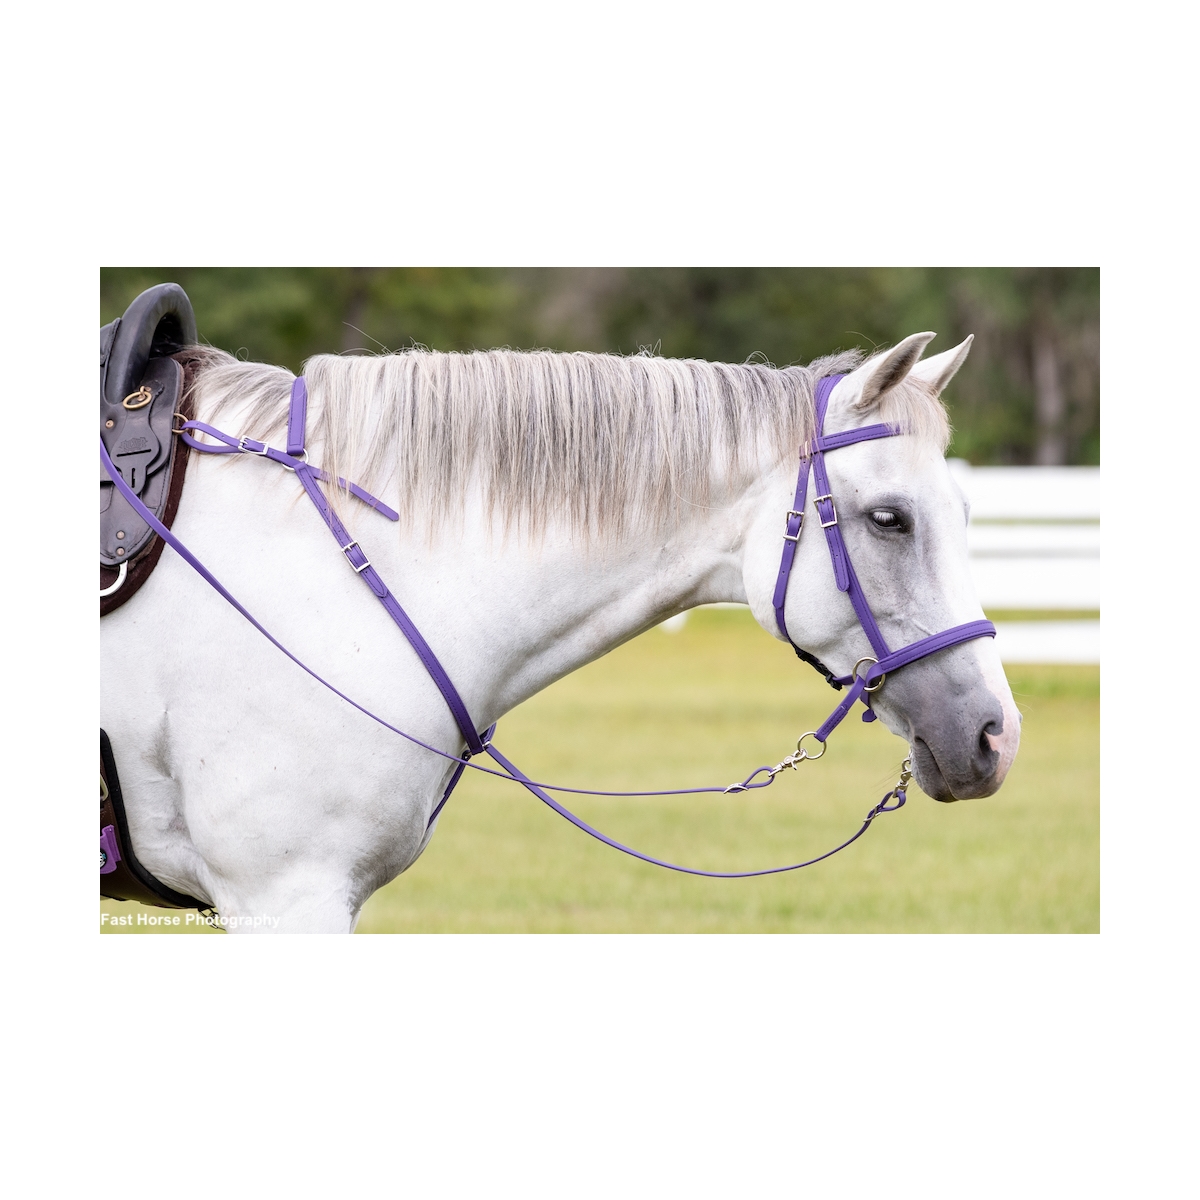 Scrawbrig Bitless Bridle Made From Beta Biothane Solid Colored